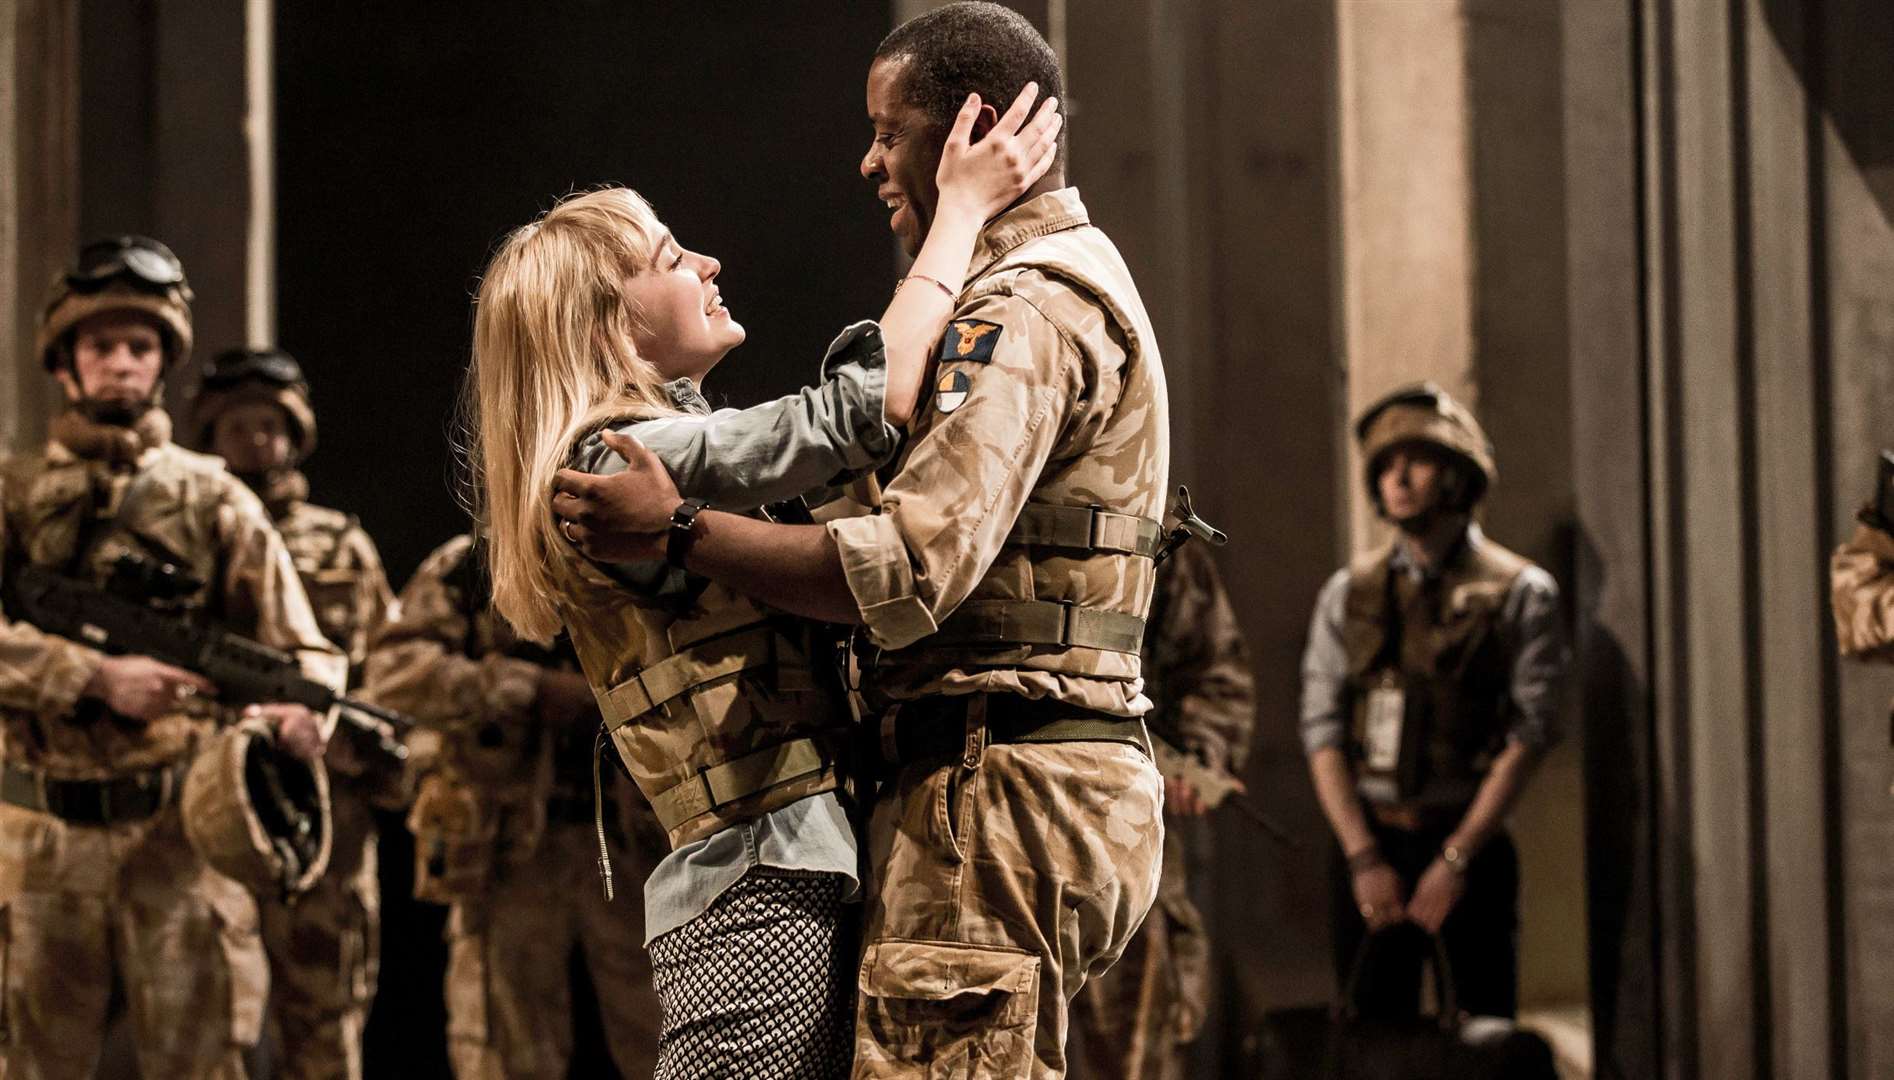 Othello is one of the National Theatre's shows on offer for schools and universities